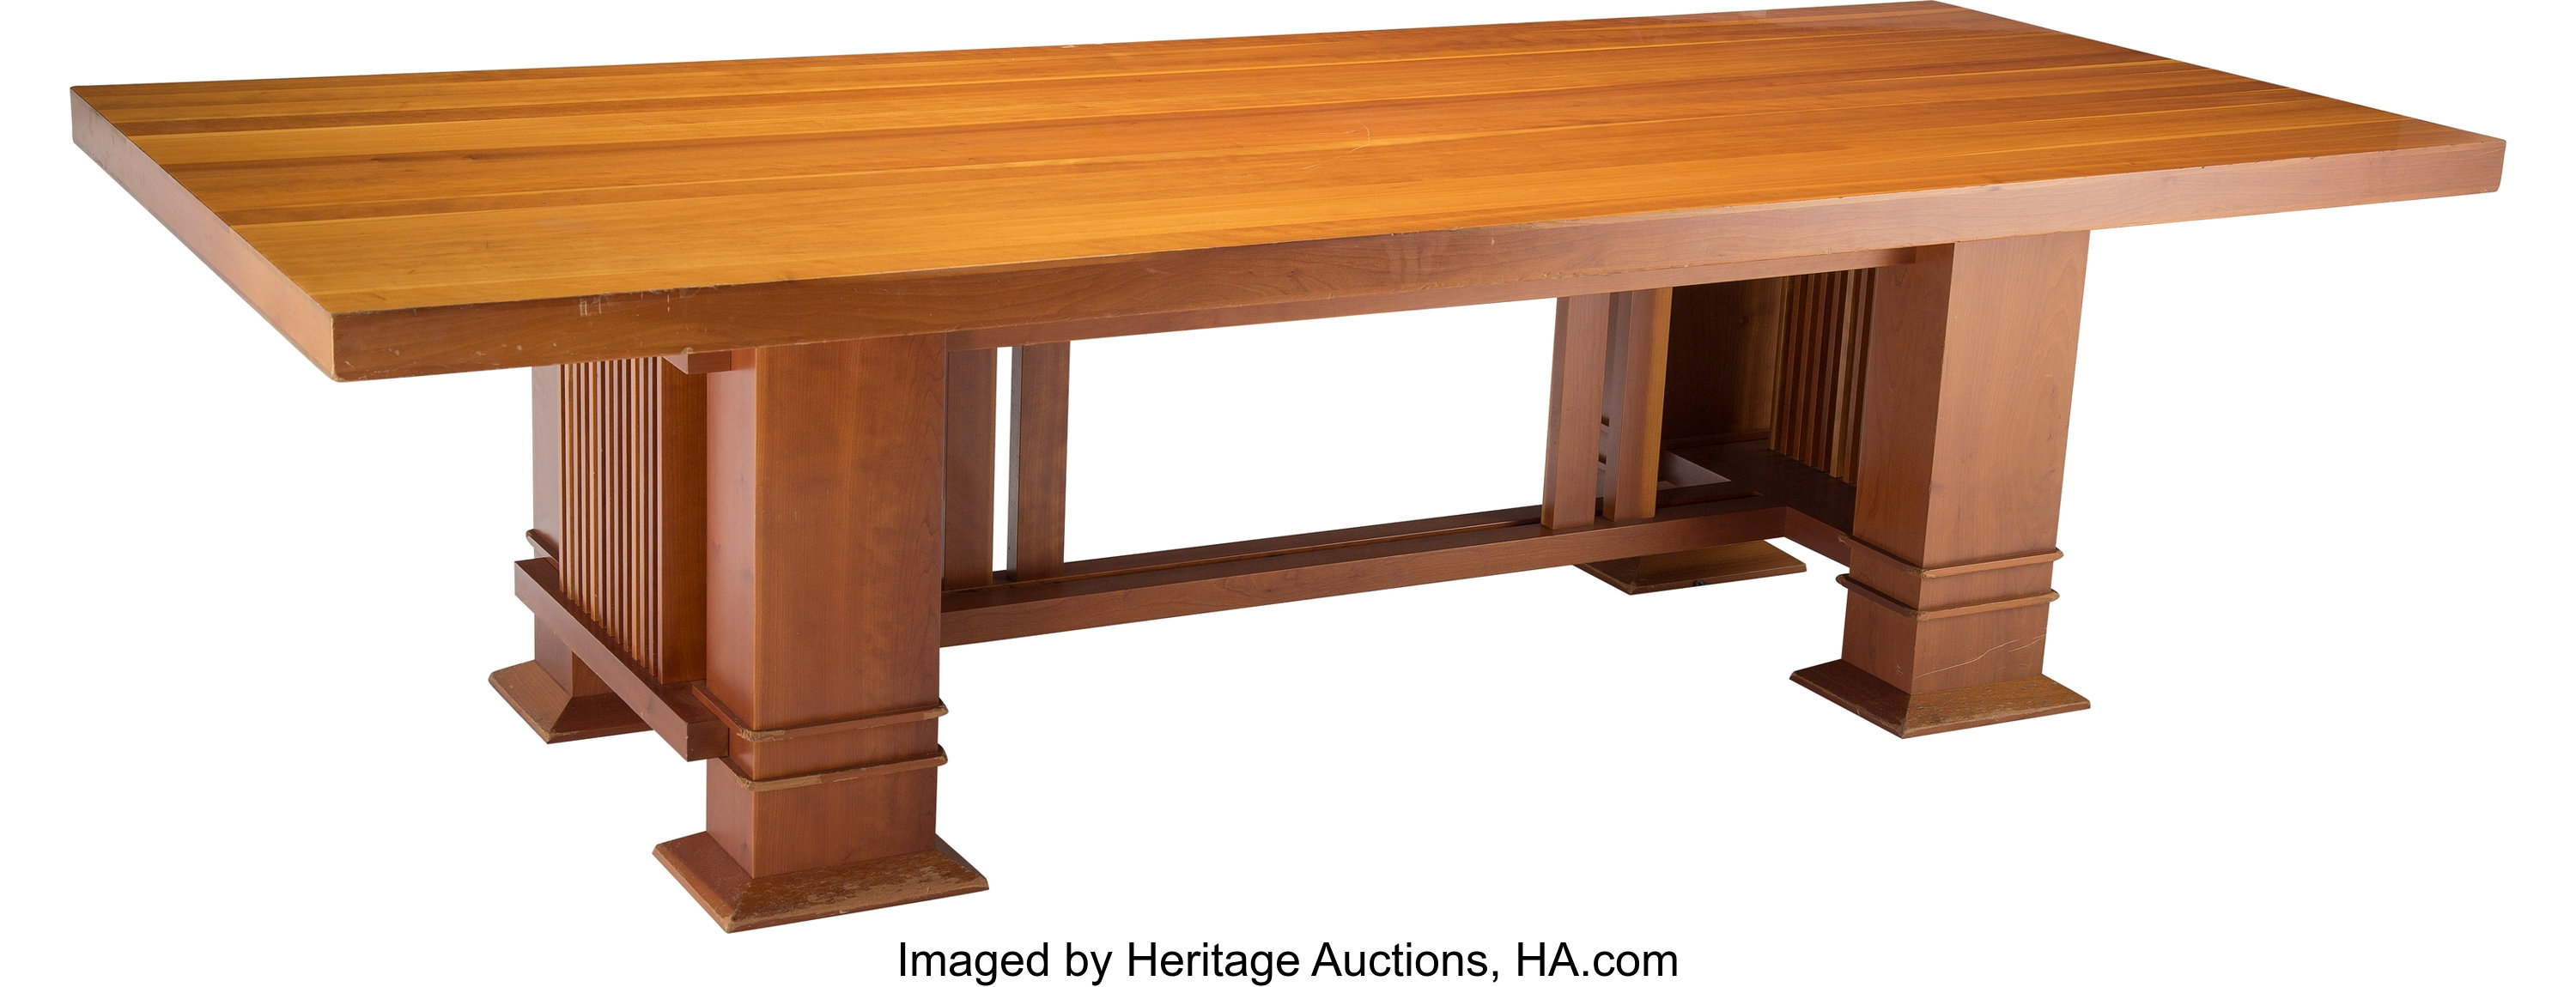 A Frank Lloyd Wright-Style Dining Table, 20th century. 27-5/8 x